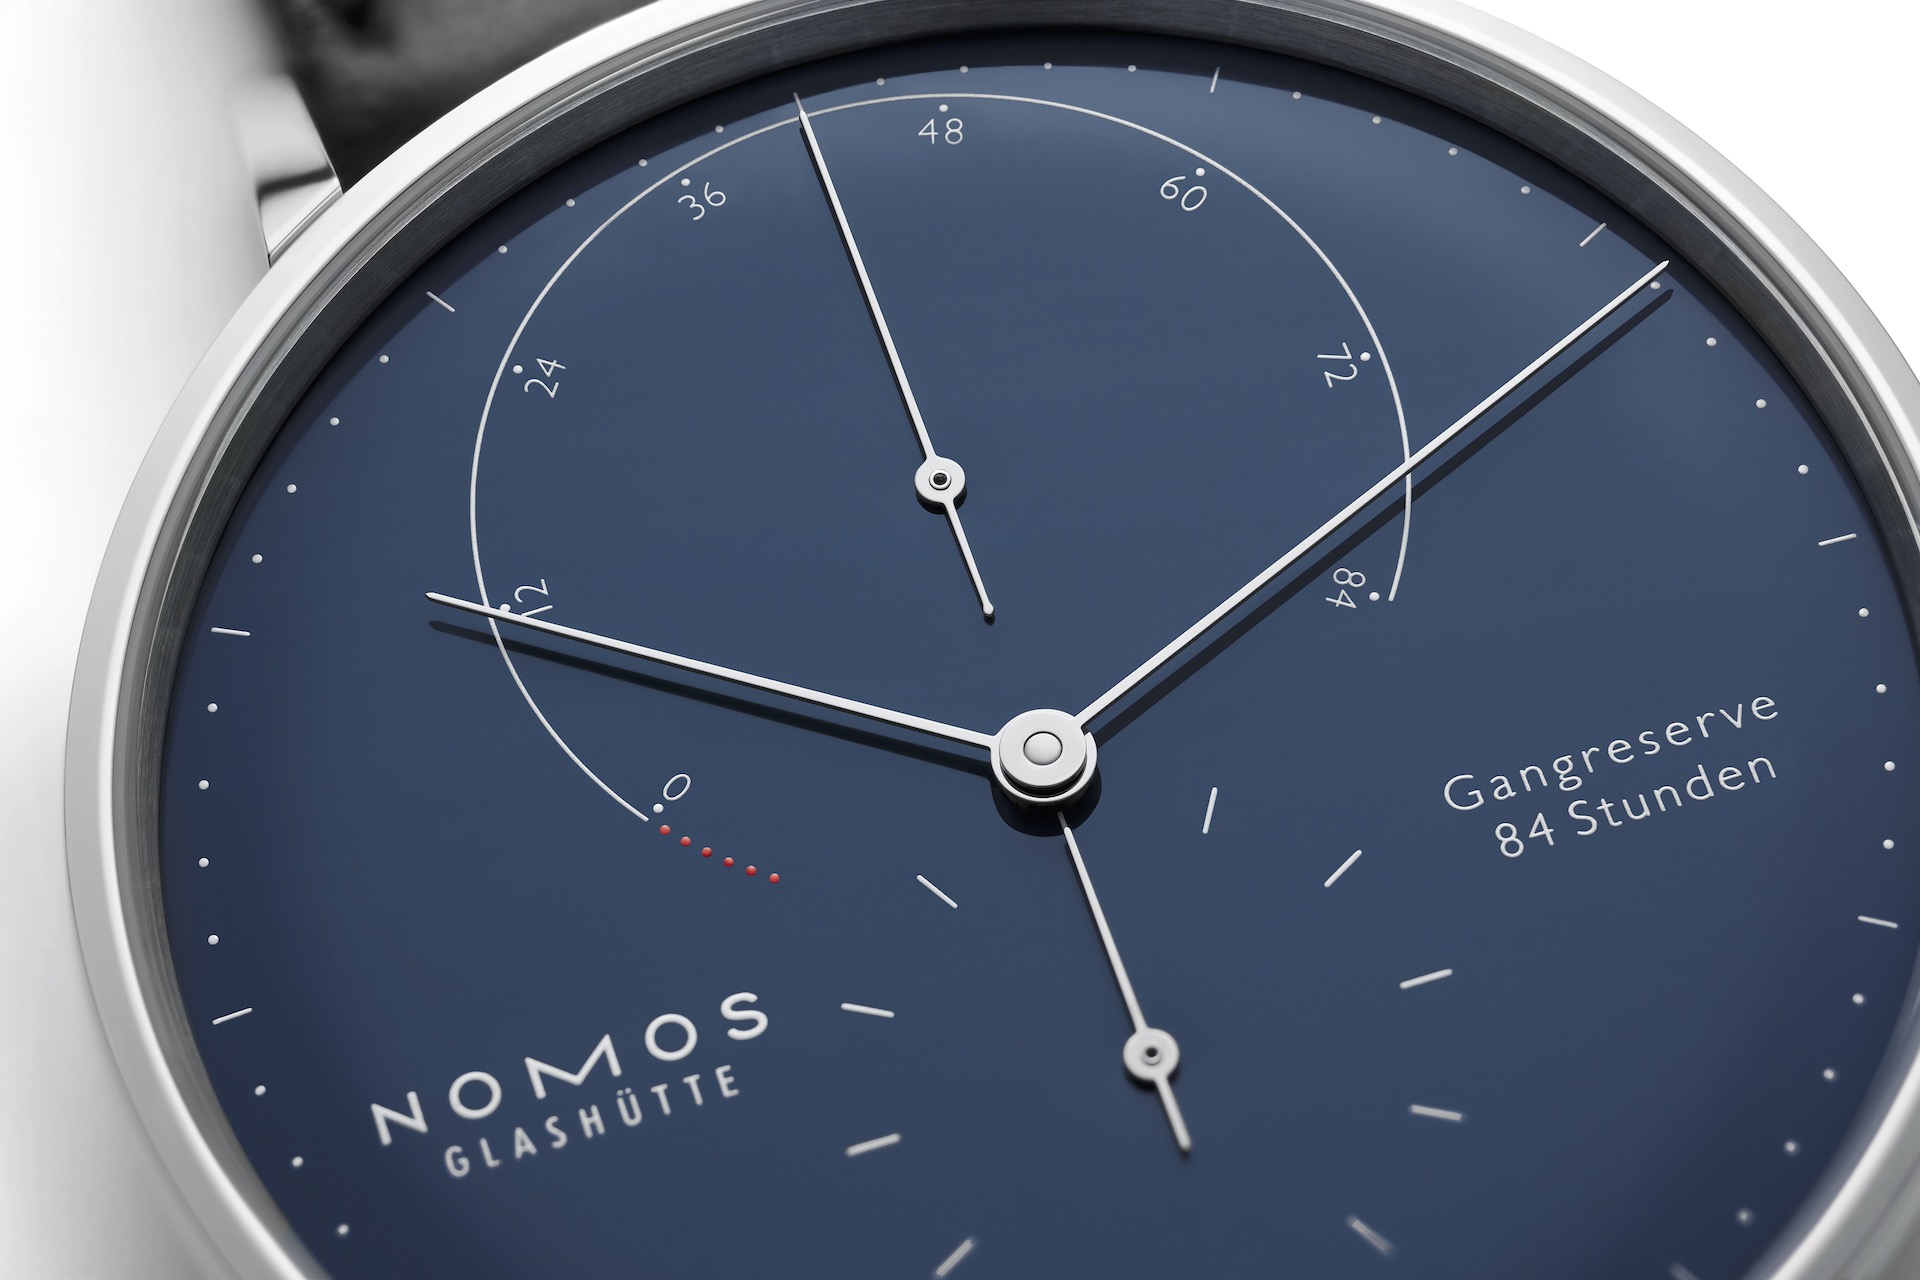 NOMOS Introduces a New Stainless Steel Lambda to Honor 175 Years of Glashütte Watchmaking